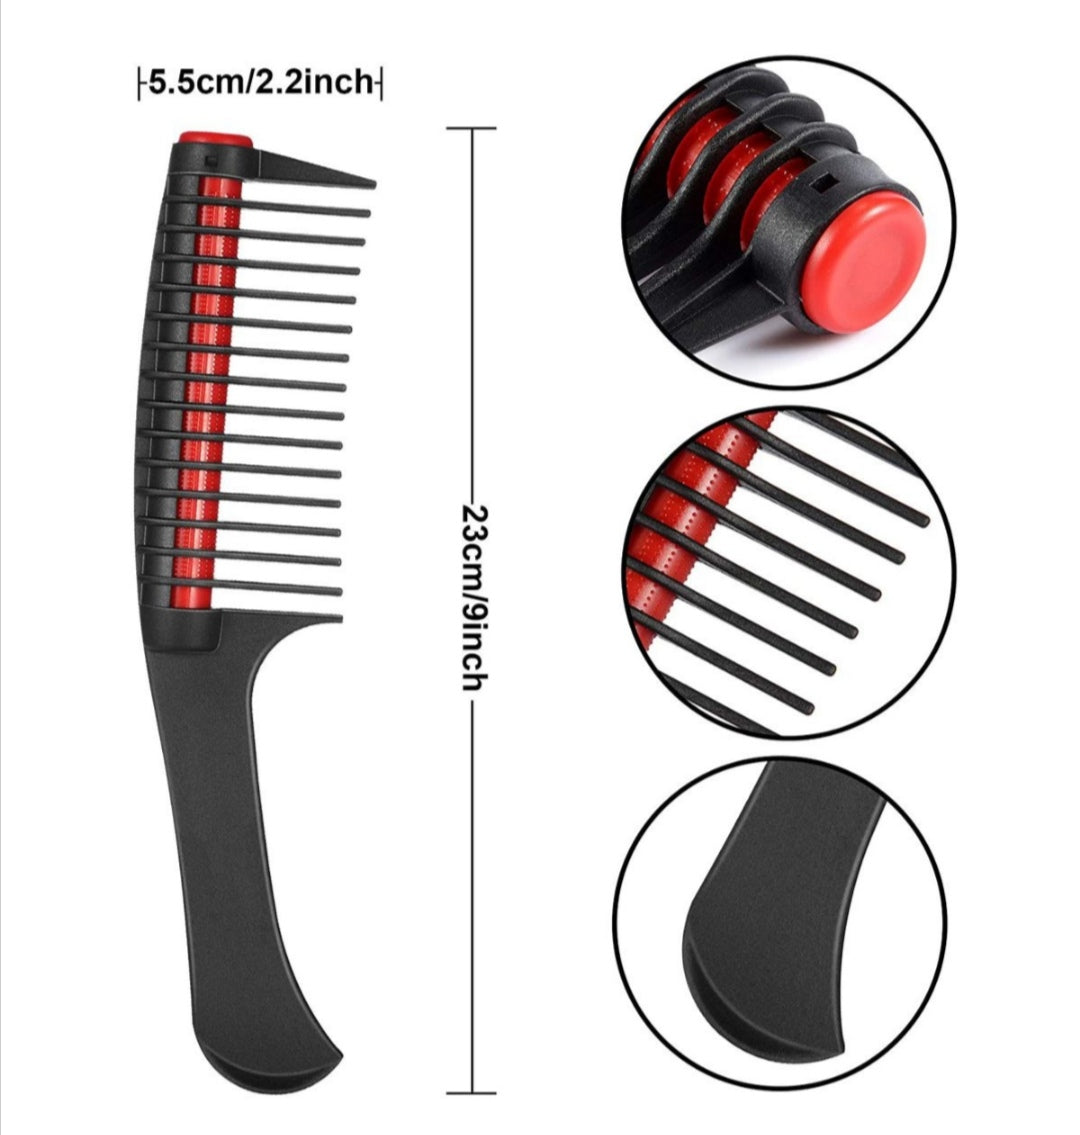 Hair Dye Comb With Integrated Removable Roller (Set Of 3)